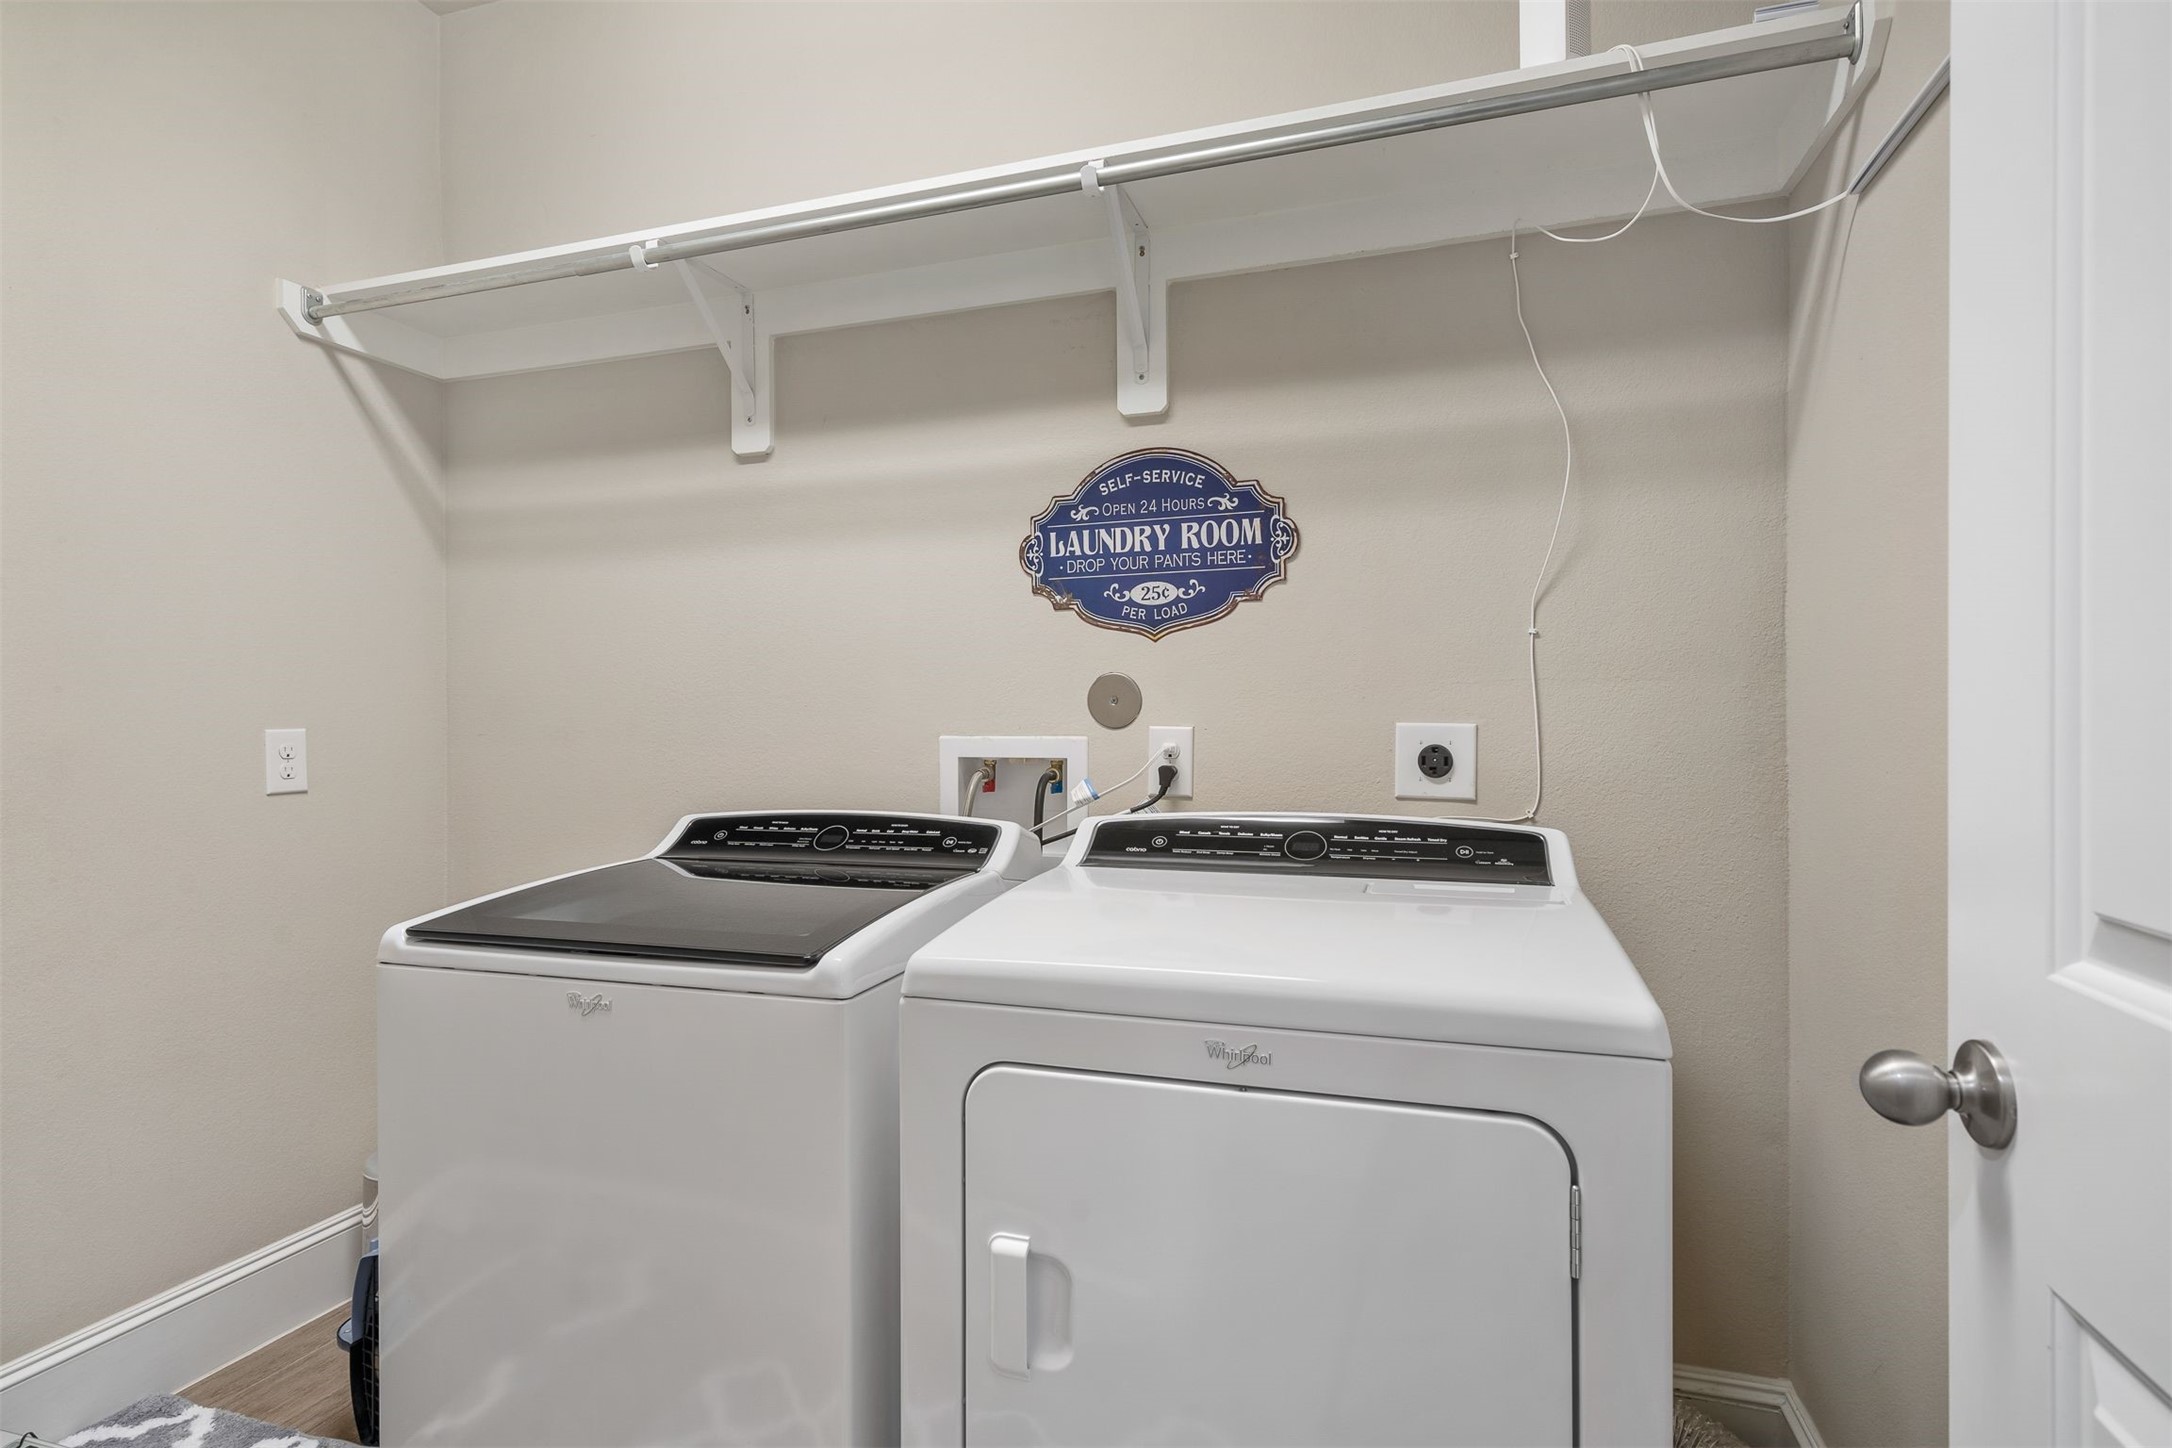 Utility room with hanging rods for drying clothes!